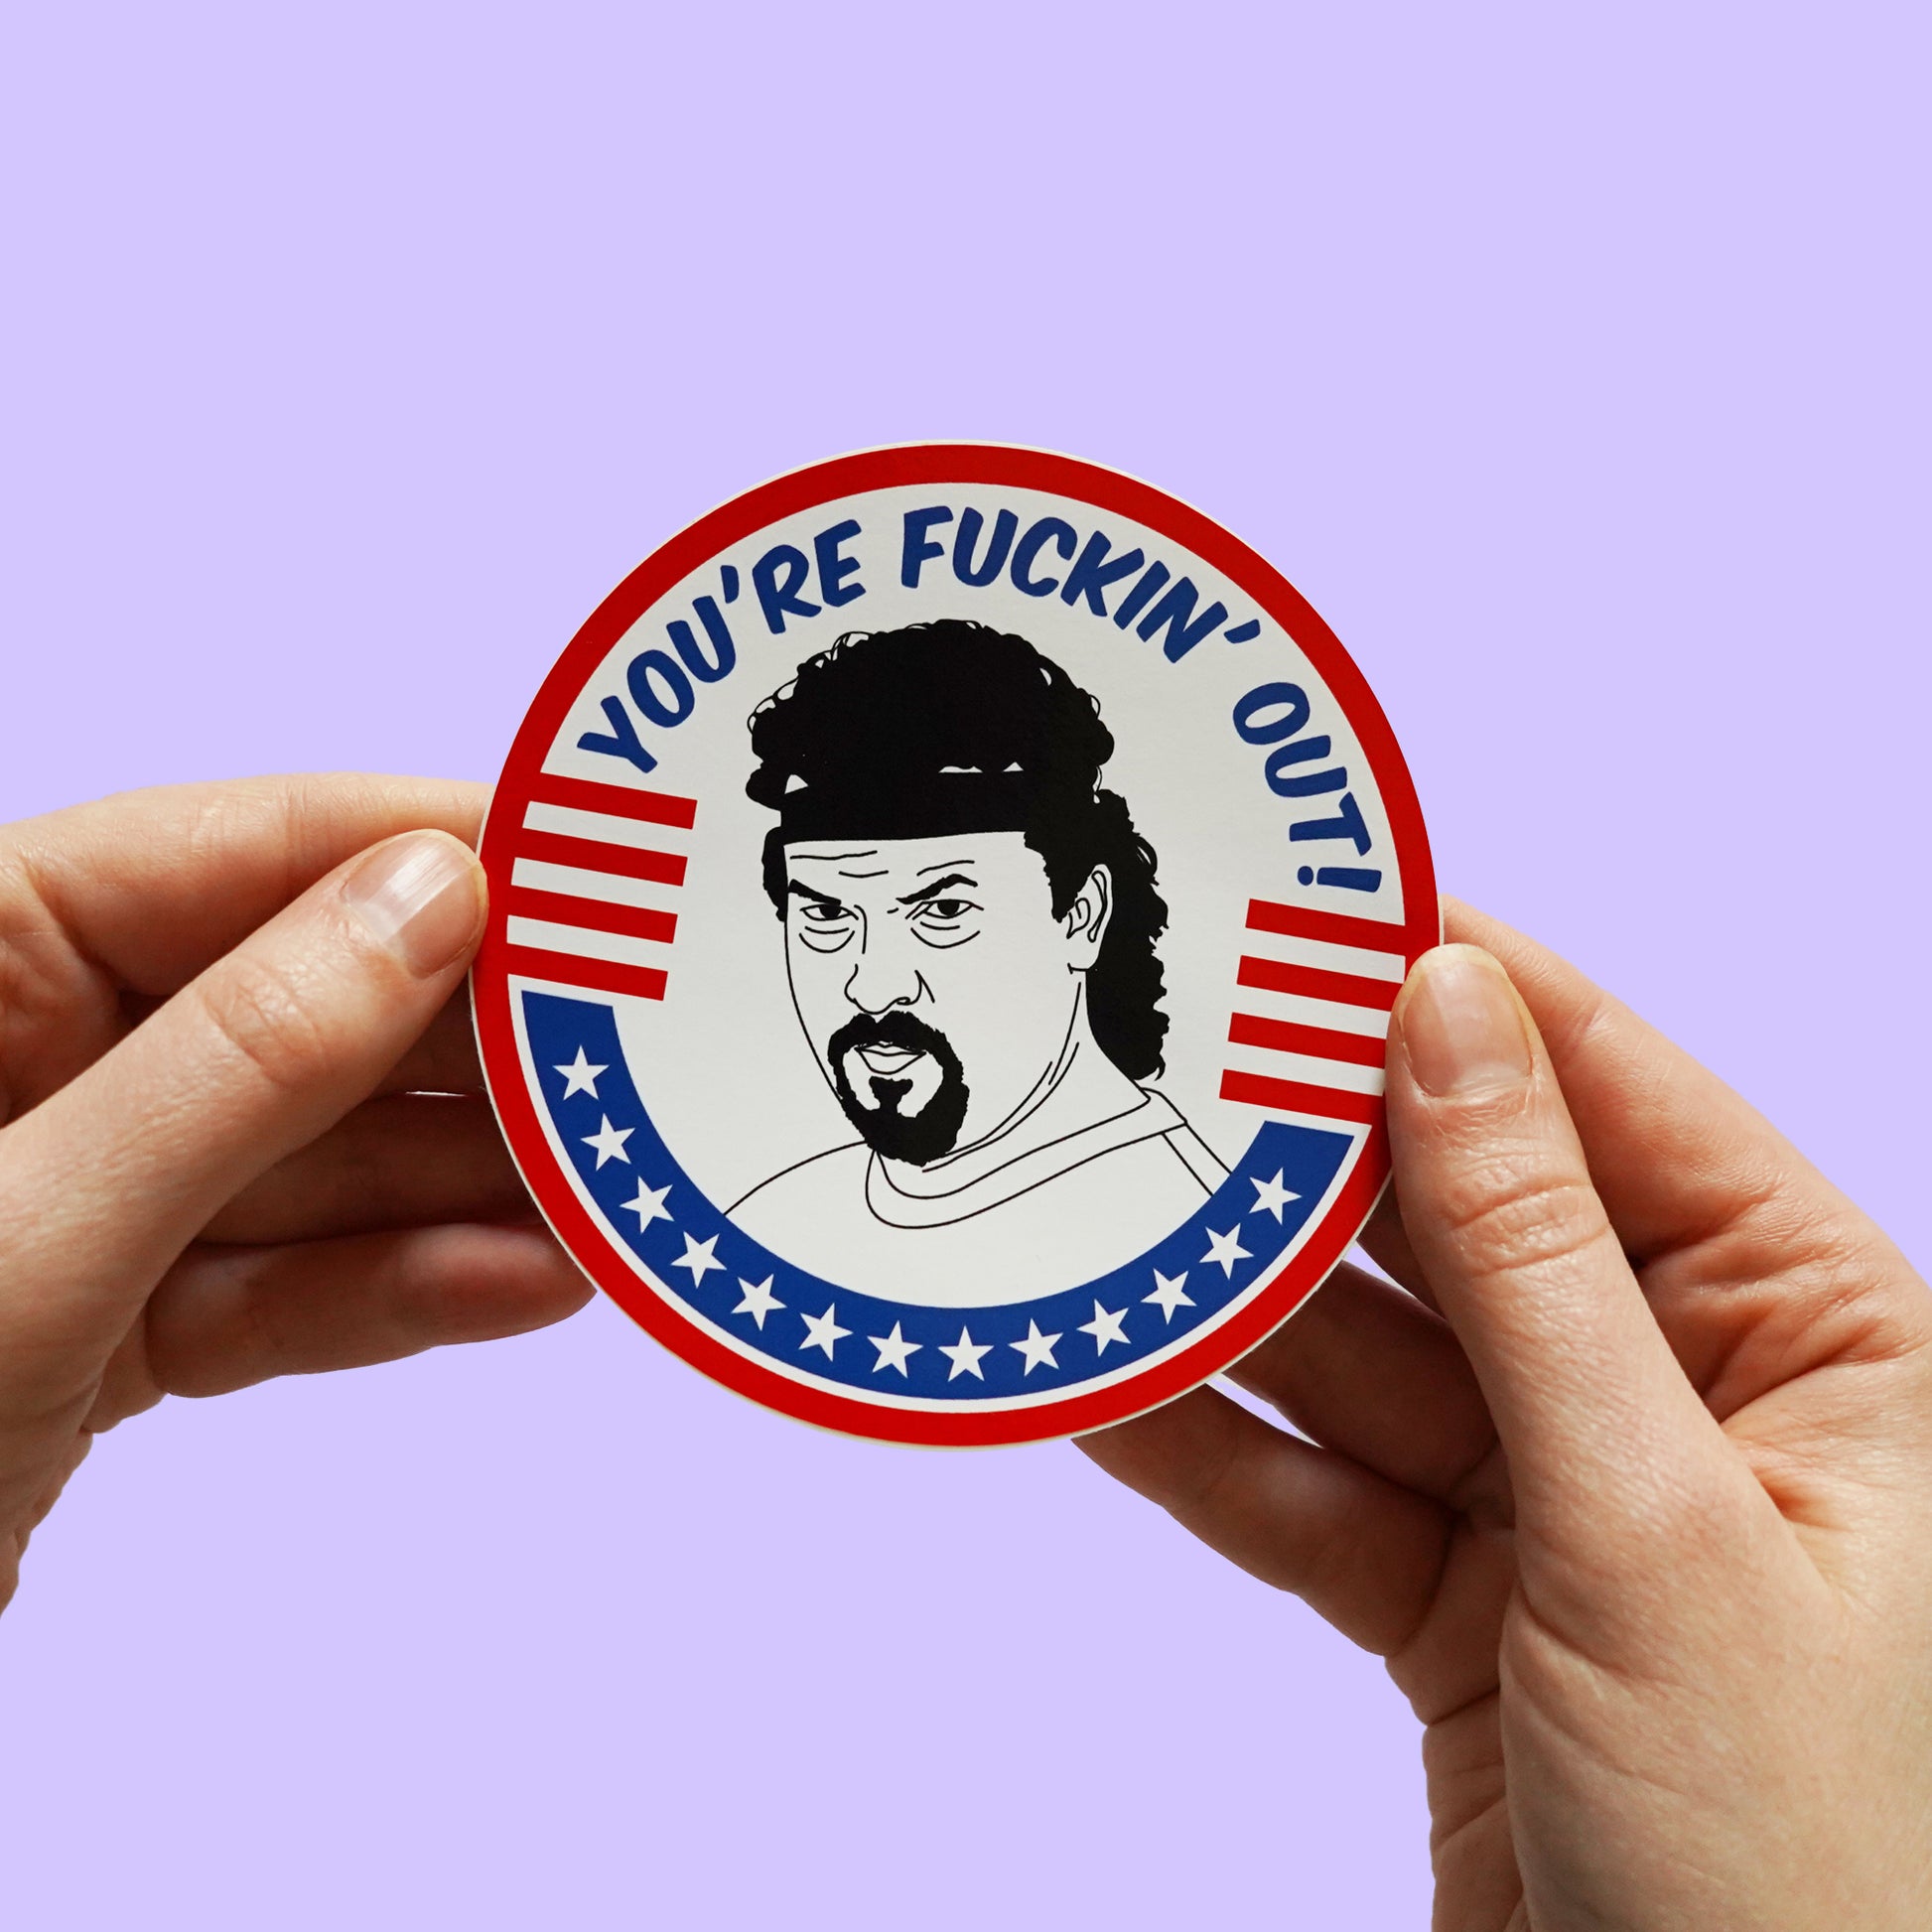 Kenny Powers, Your F*ckin' Out! Sticker  Eastbound and Down inspired sticker